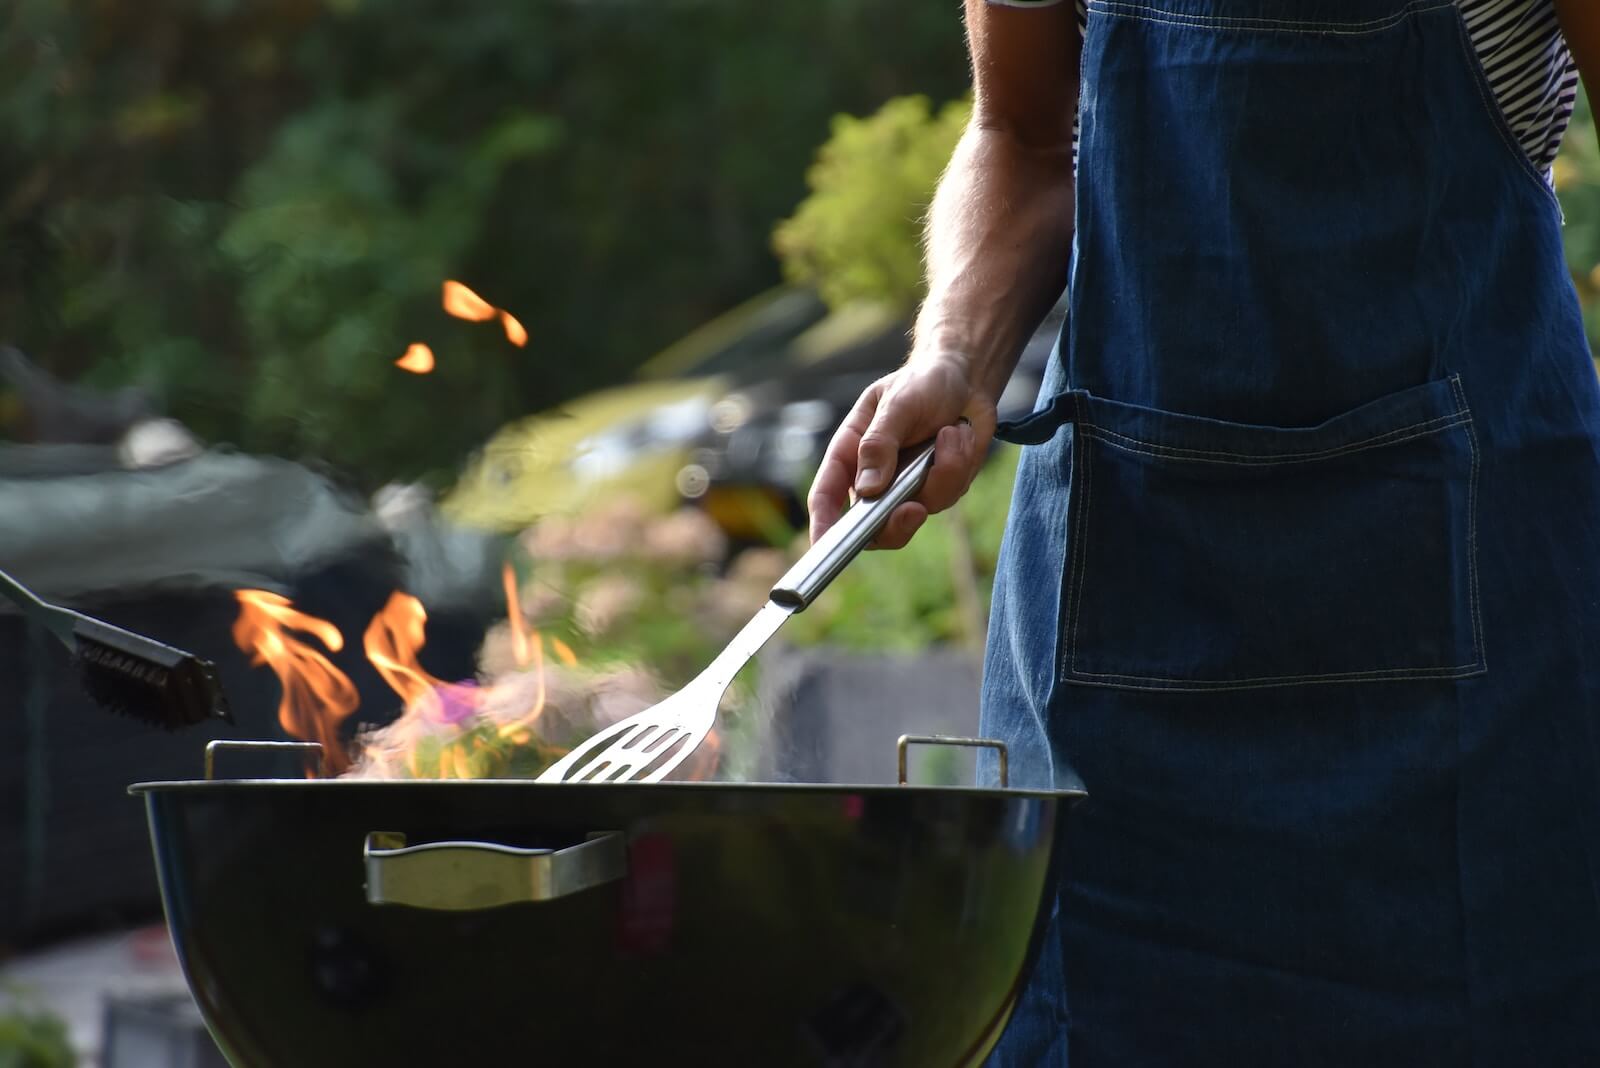 A man cooking on a charcoal grill outside